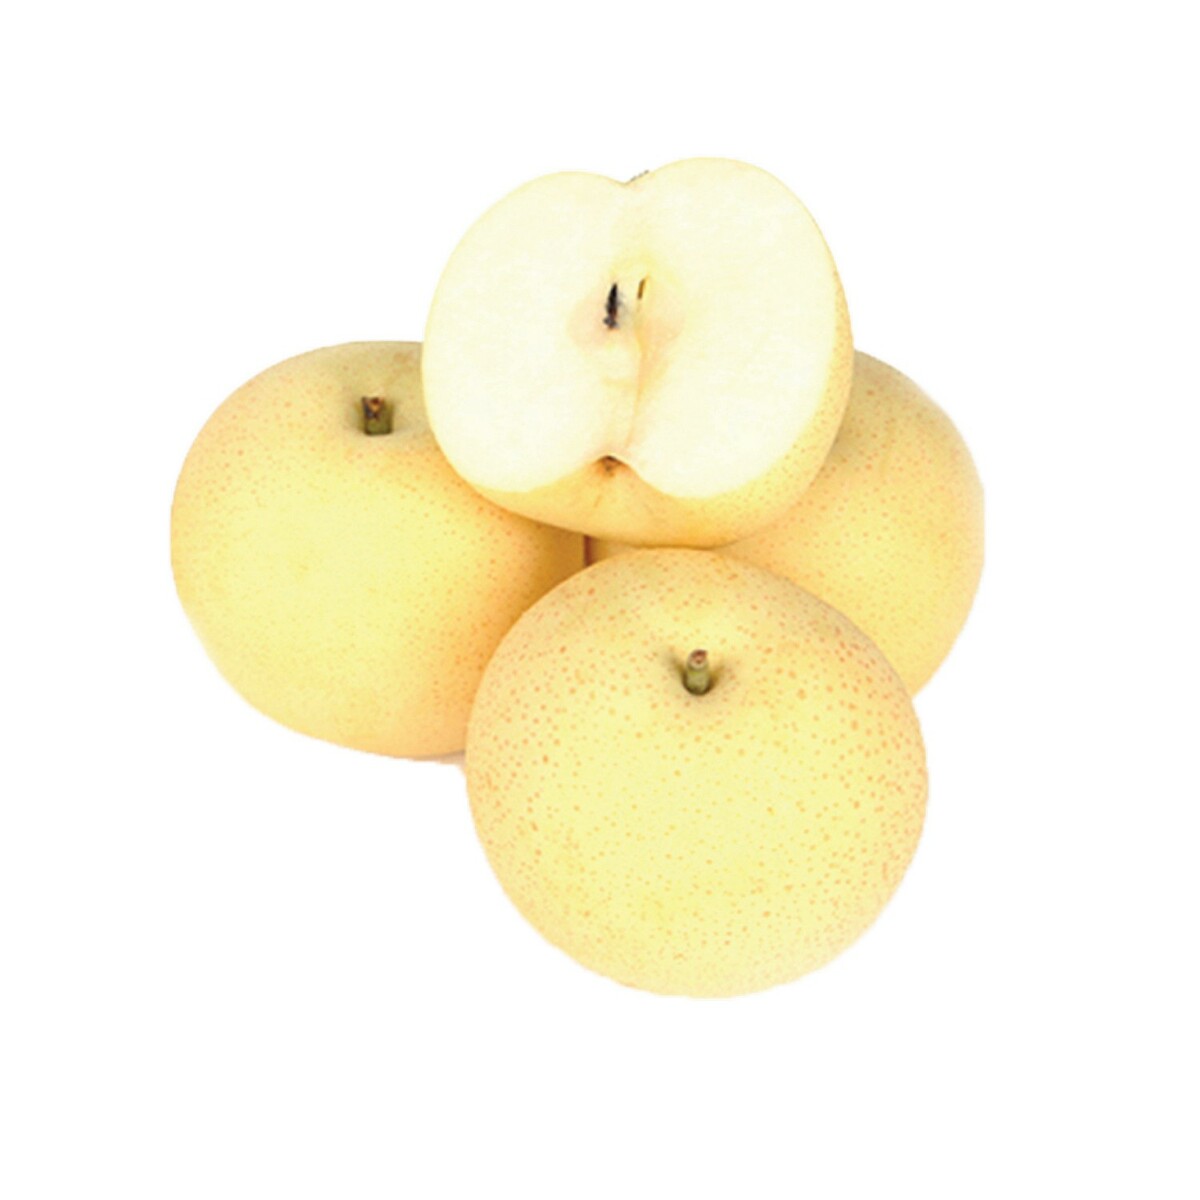 Pears Golden China 1kg Approx Weight Online At Best Price Pears Lulu Indonesia 